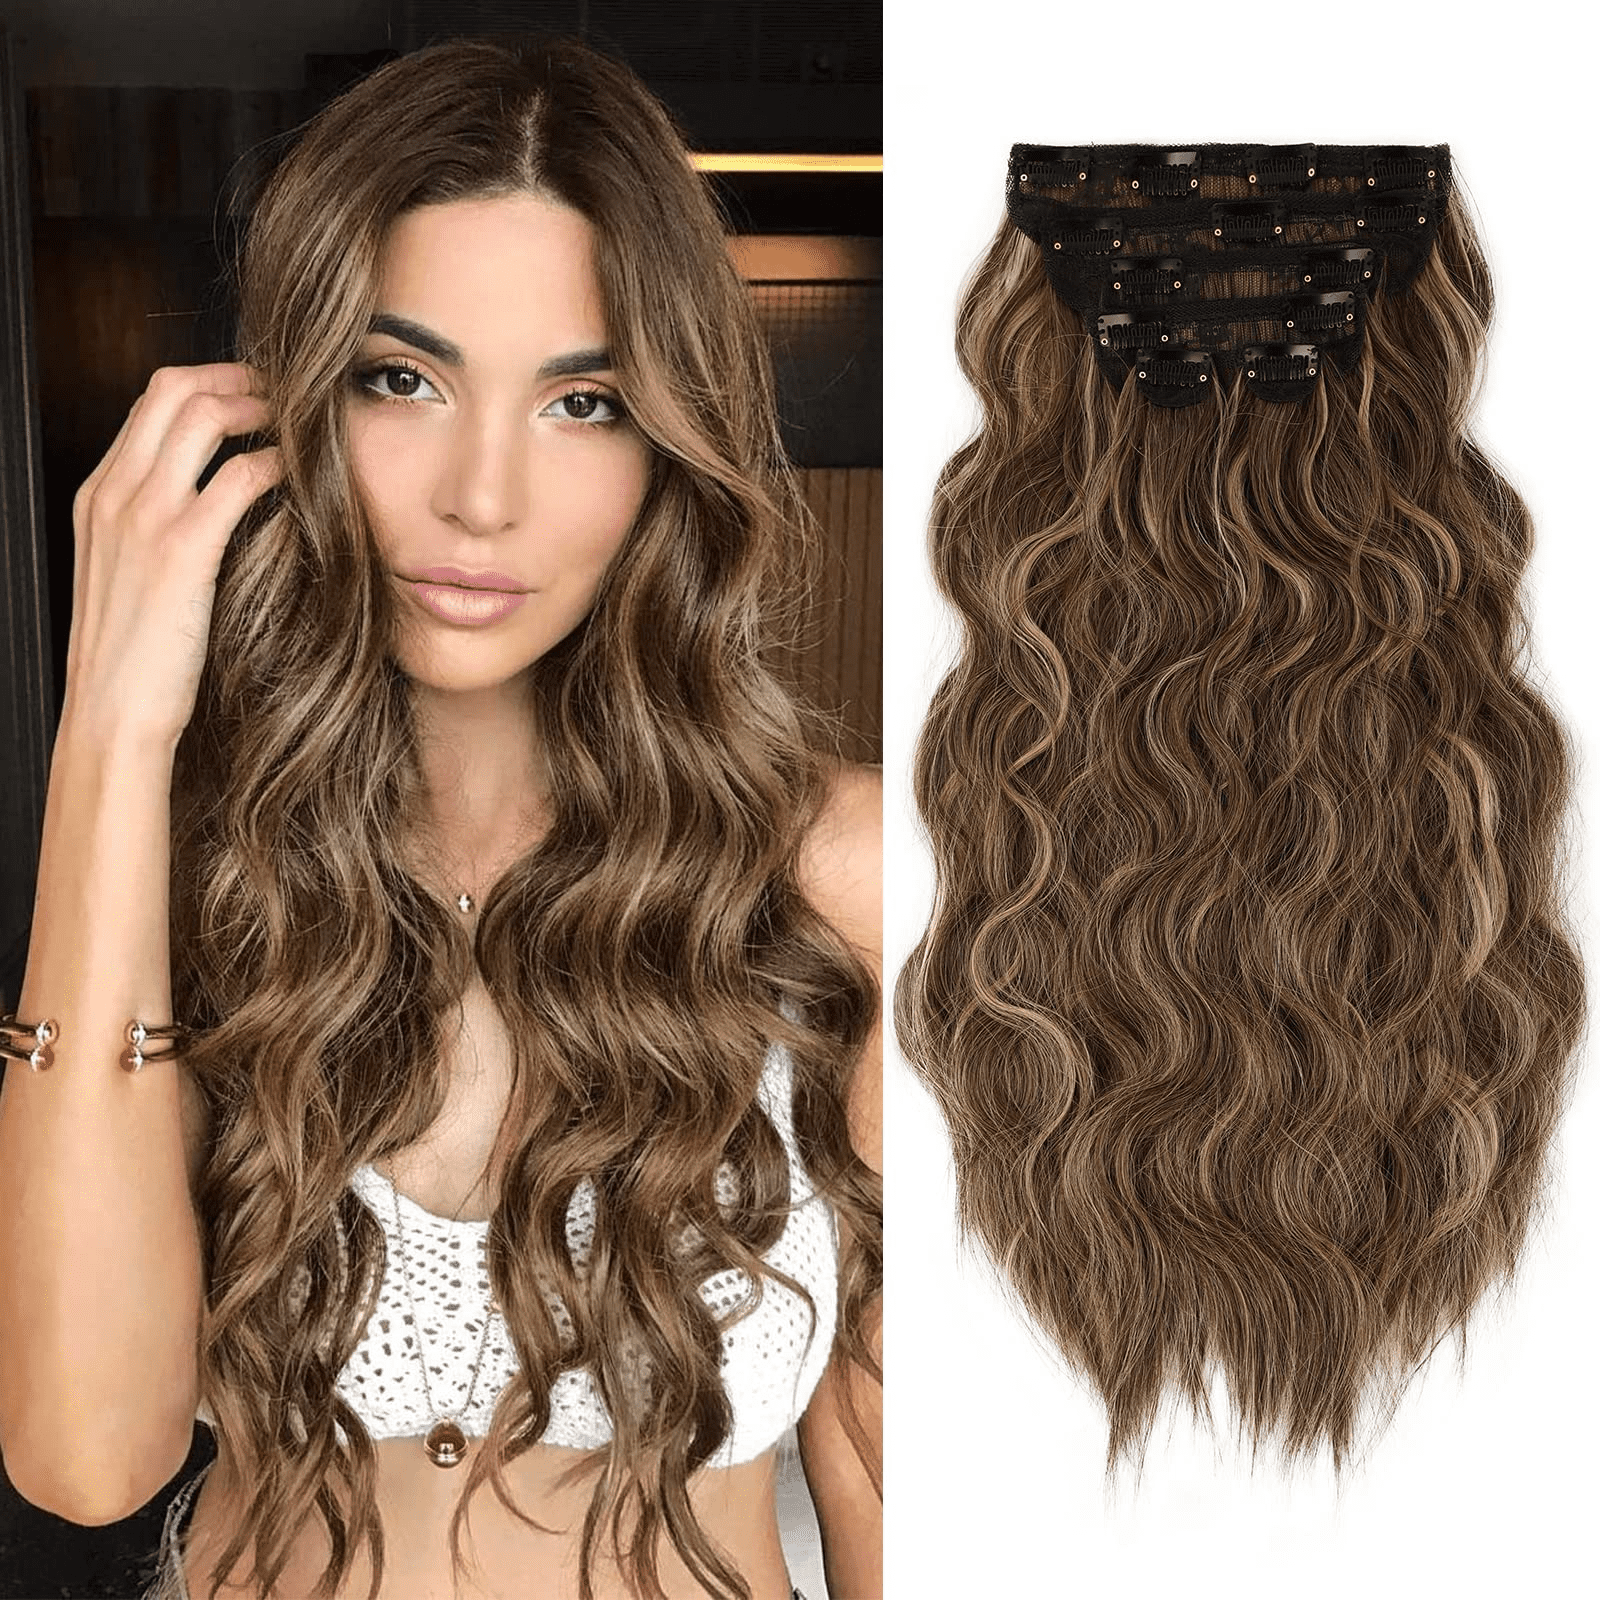 Morica Clip In Hair Extension 20 Inch Brown Mix Ash Blonde Highlights 6pcs Natural Long Wavy